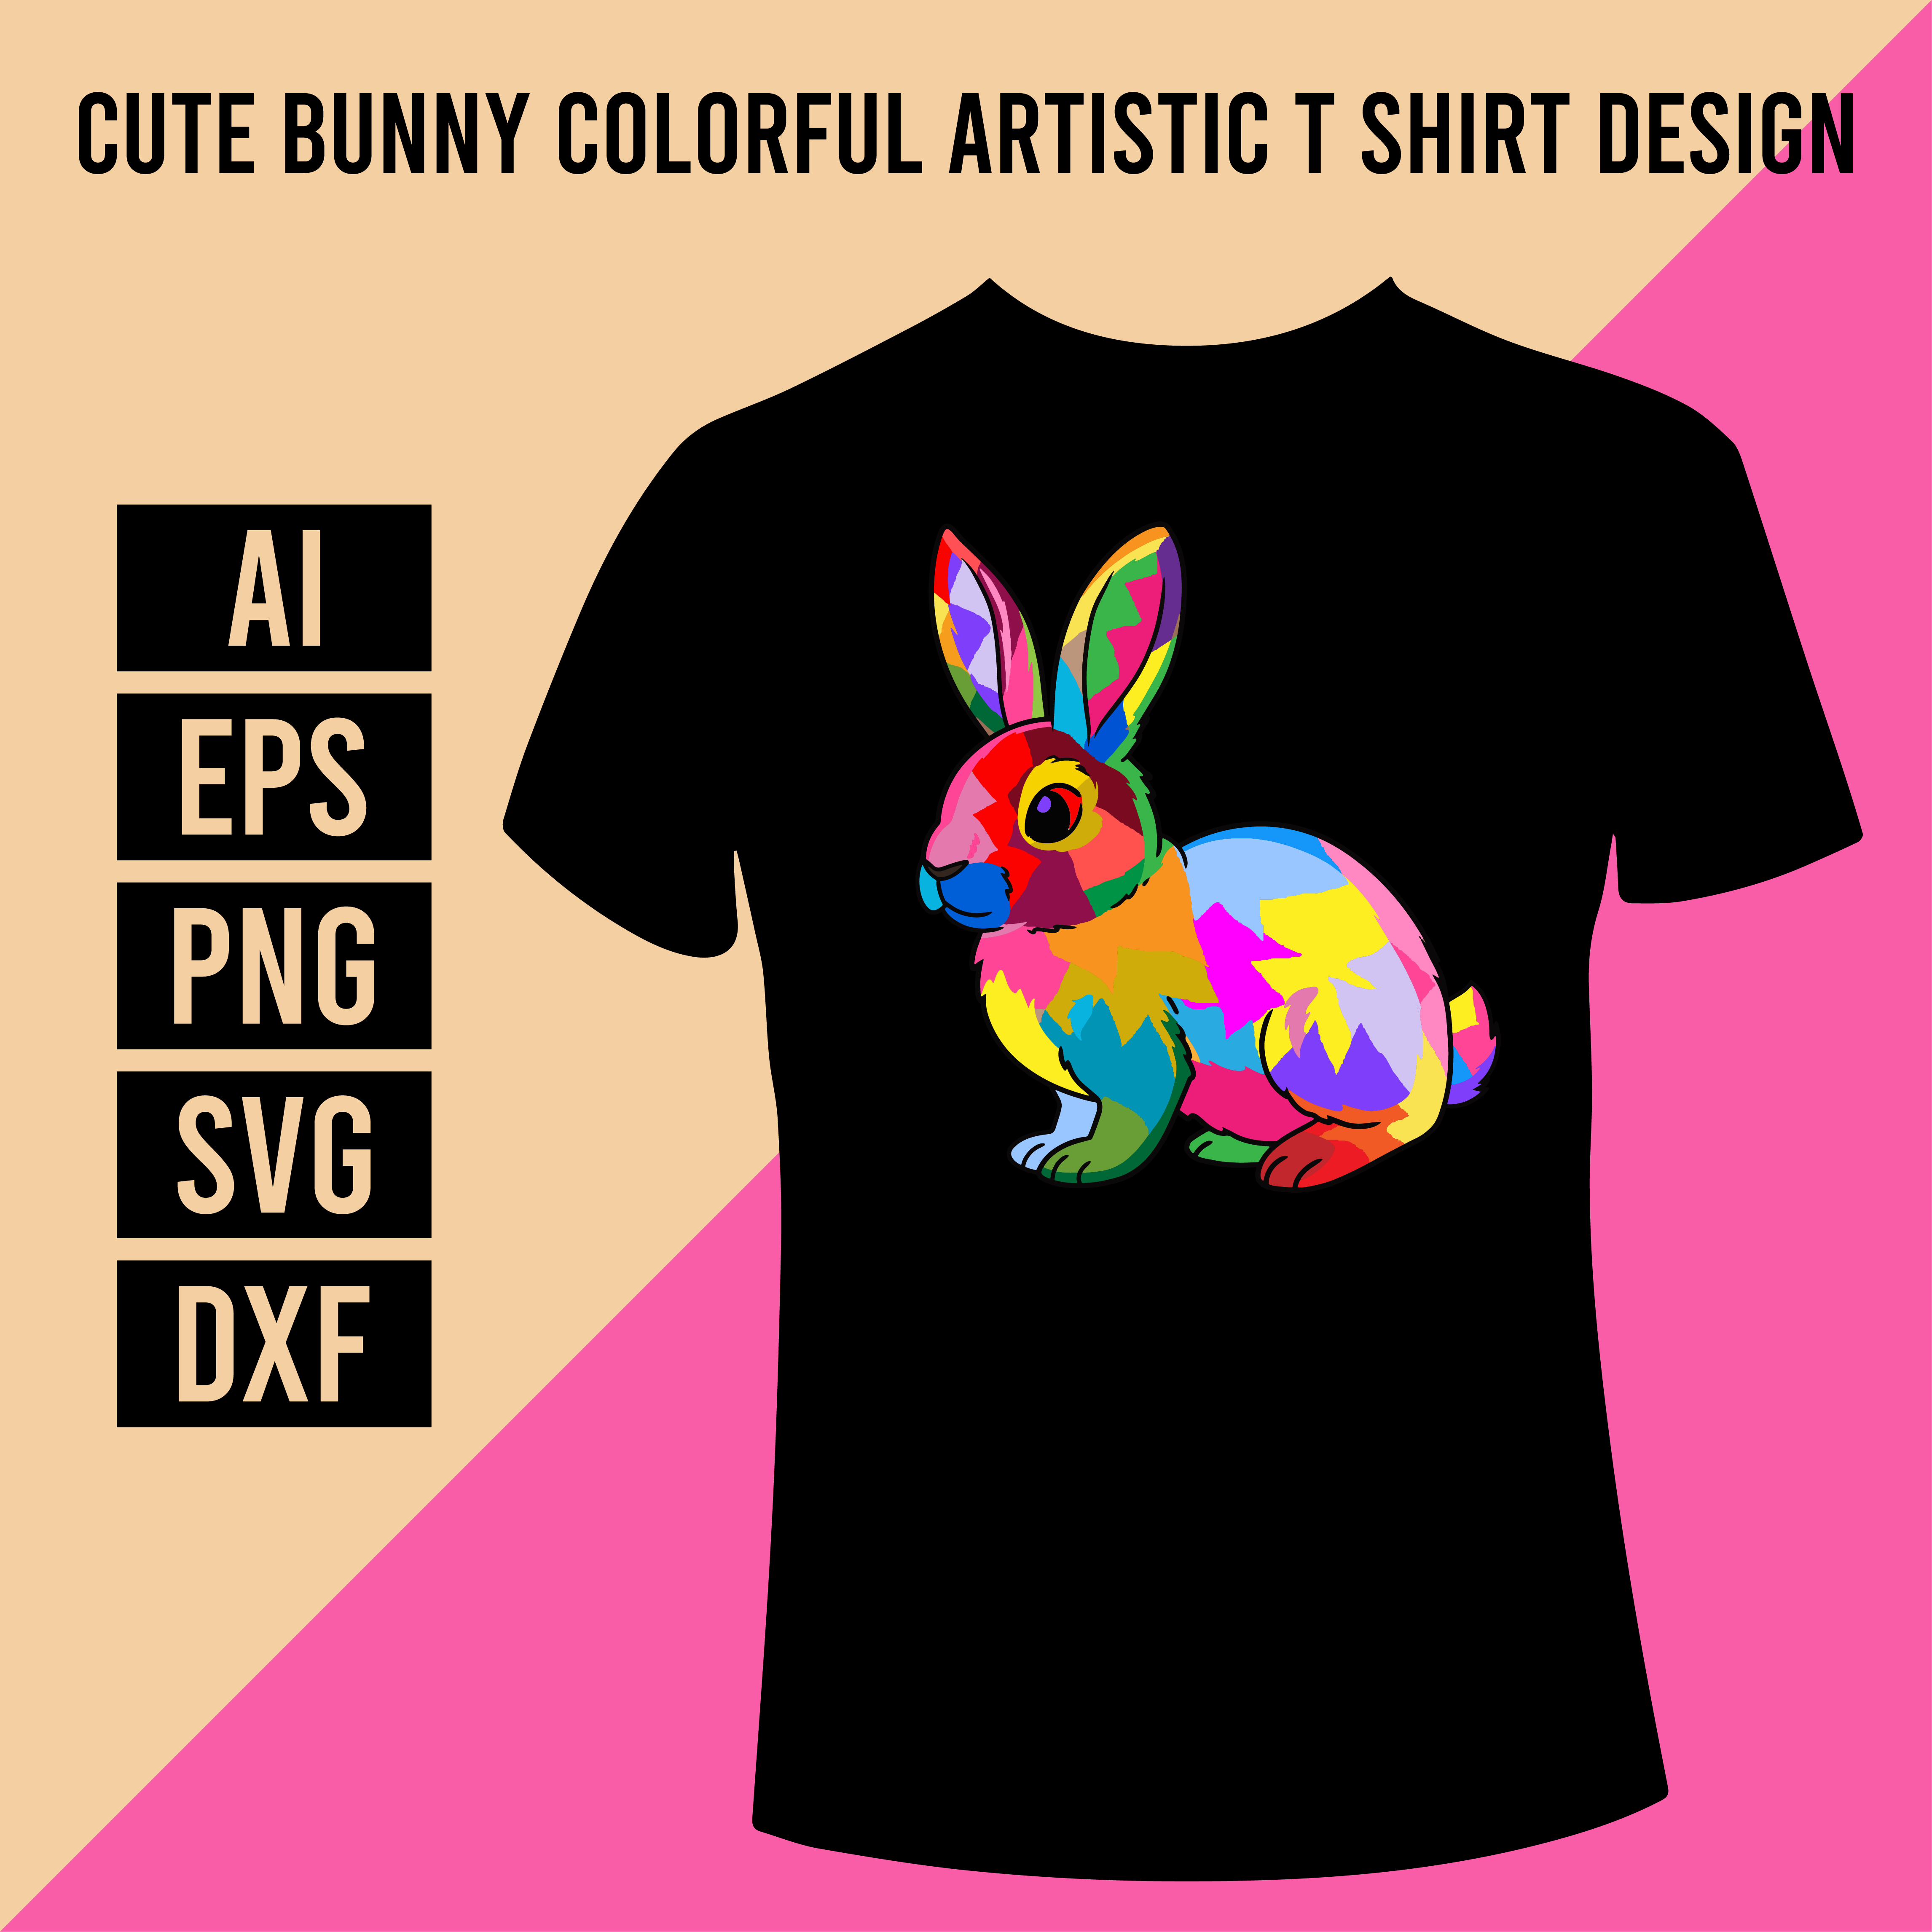 Cute Bunny Colorful Artistic T Shirt Design cover image.